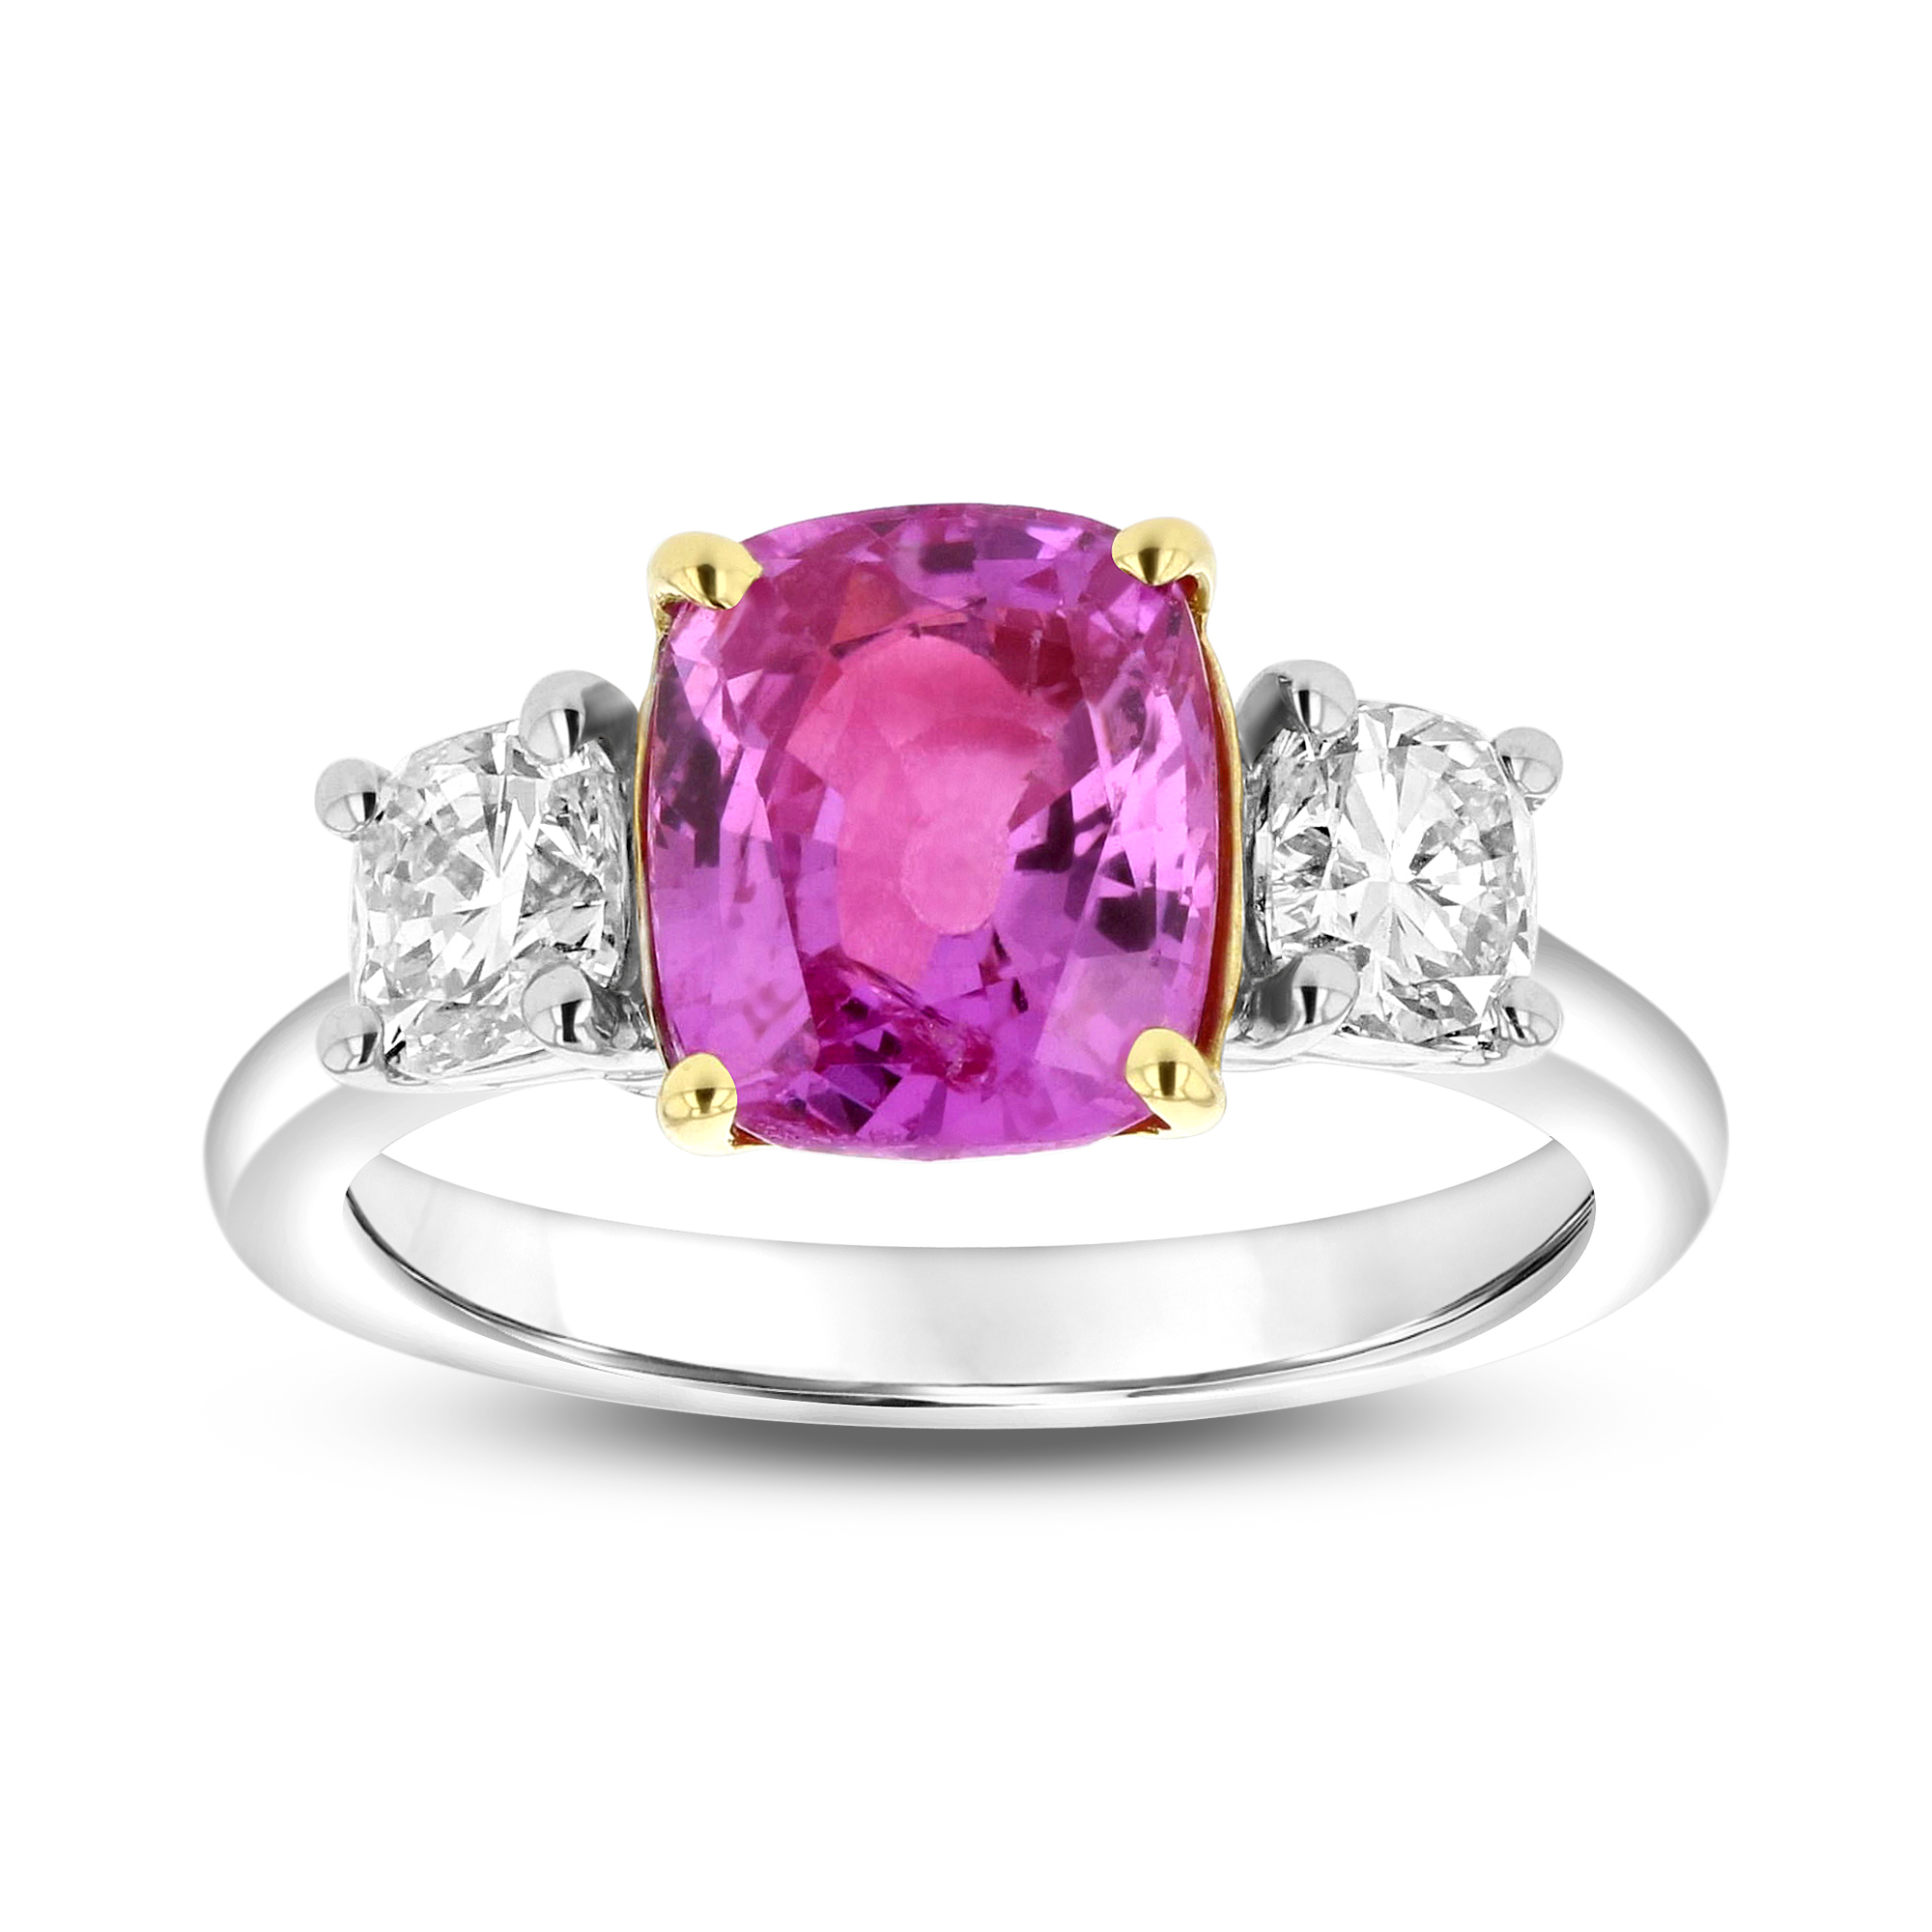 View 3.95ctw Diamond and Pink Sapphire Ring in 18k Yellow/Platinum